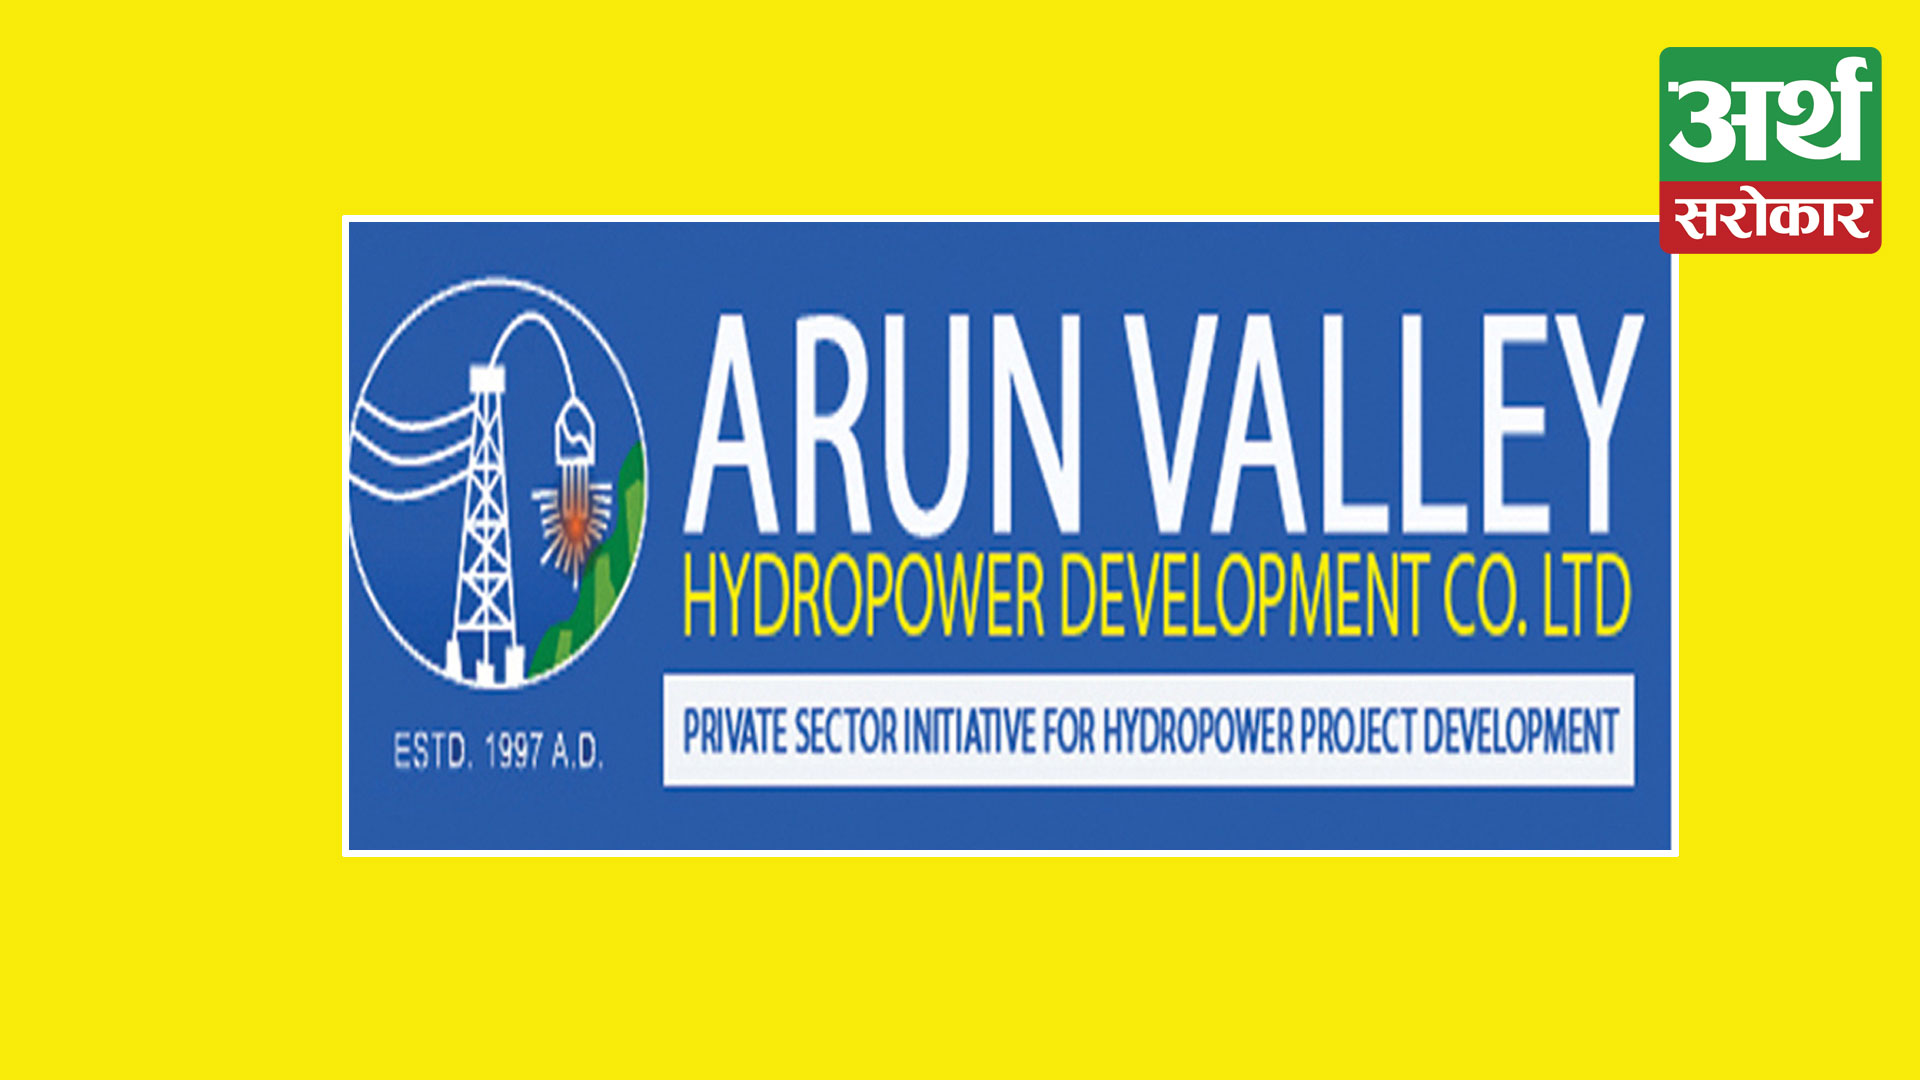 Arun Valley Hydropower’s profit from electricity sales increased by Rs 47 million, net profit increased by 102.04%